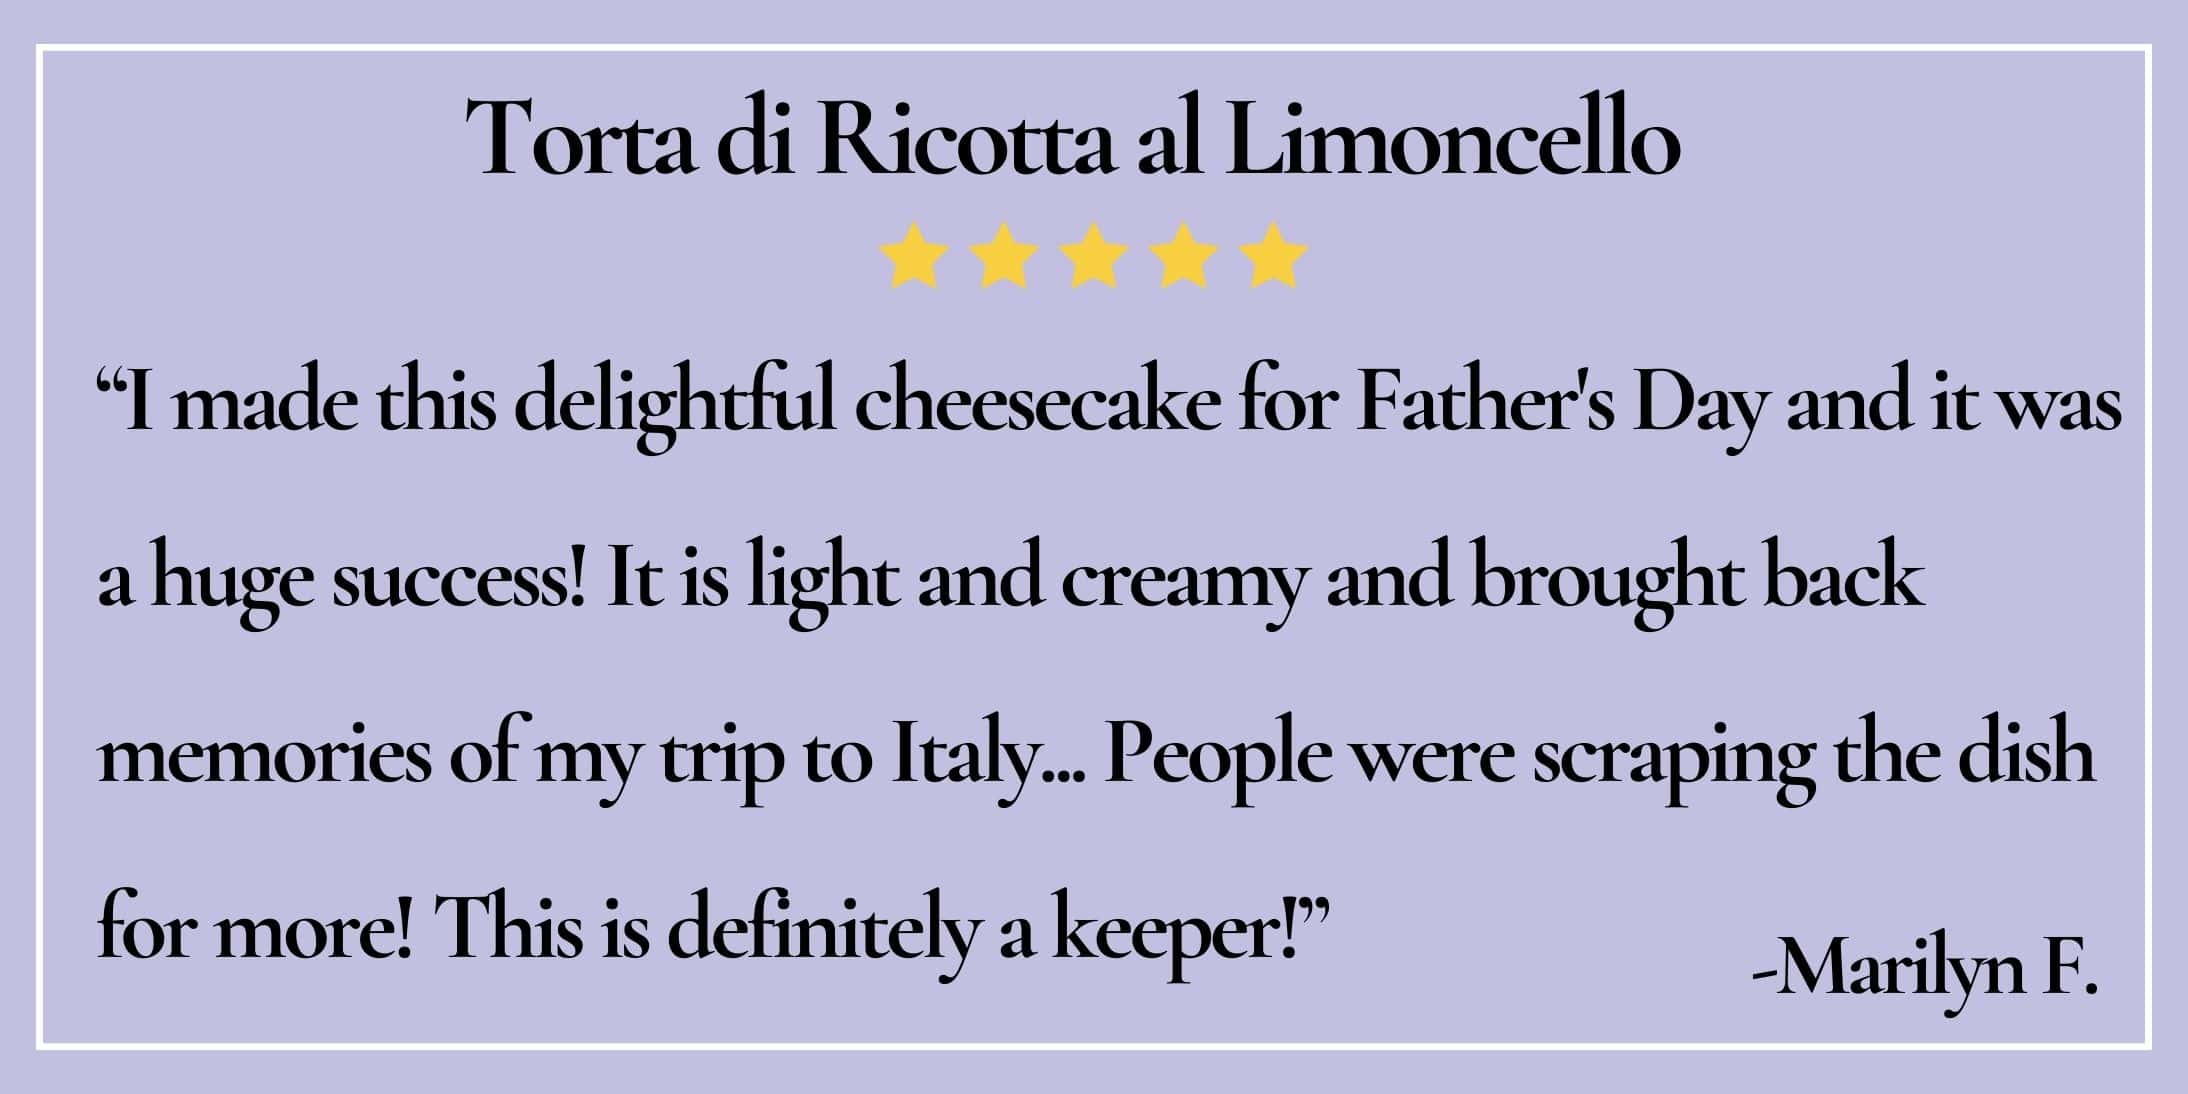 text box with paraphrase: It is light and creamy and brought back memories of my trip to Italy. -Marilyn F.